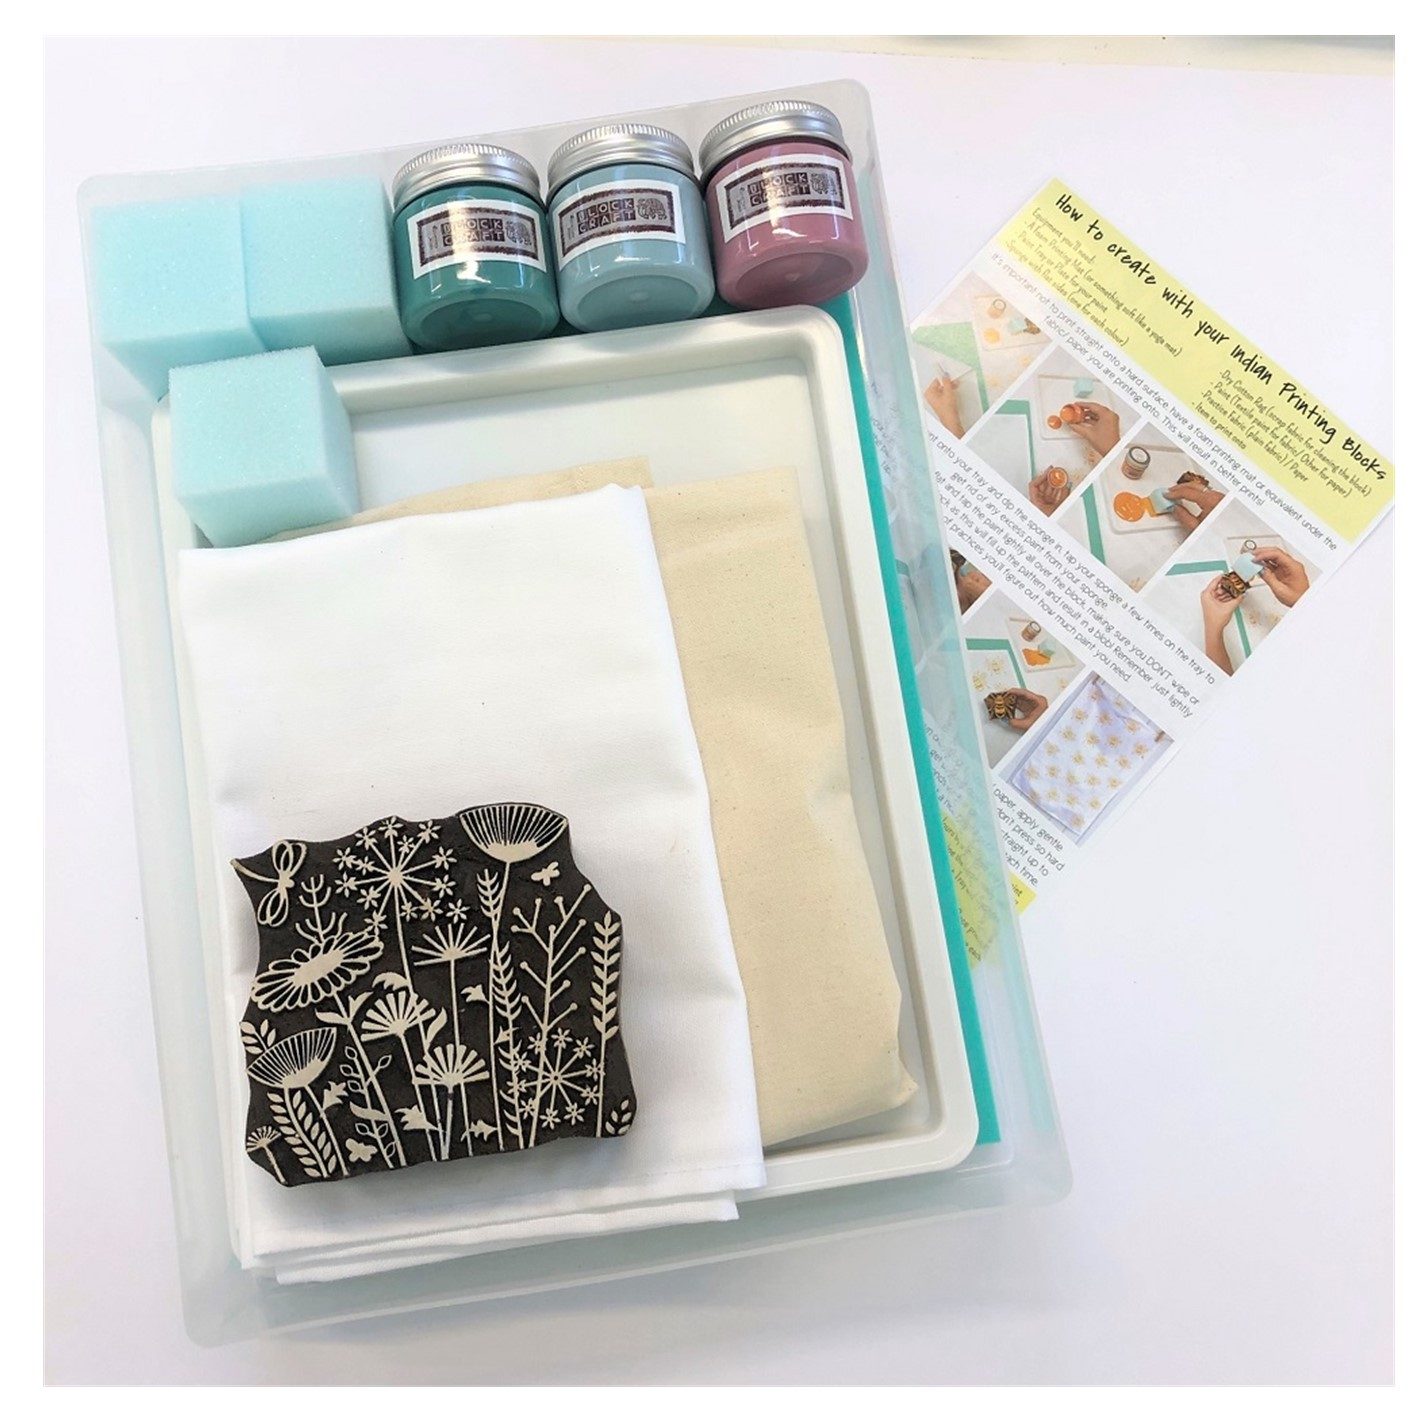 Complete Block Printing Kit: Meadow Design from The Indian Block